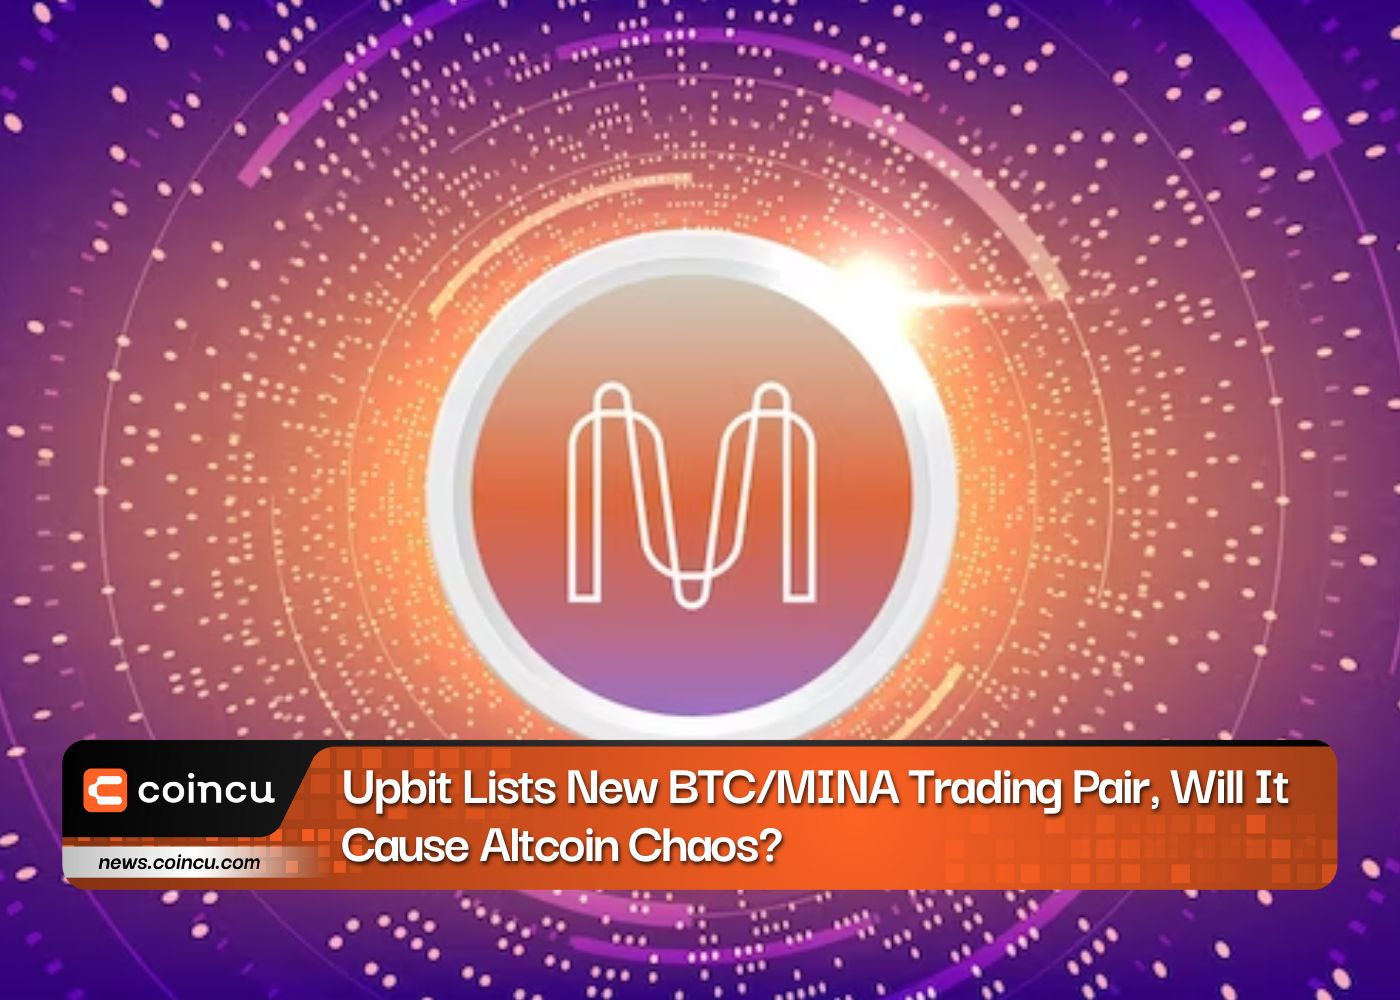 Upbit Lists New BTC/MINA Trading Pair, Will It Cause Altcoin Chaos?